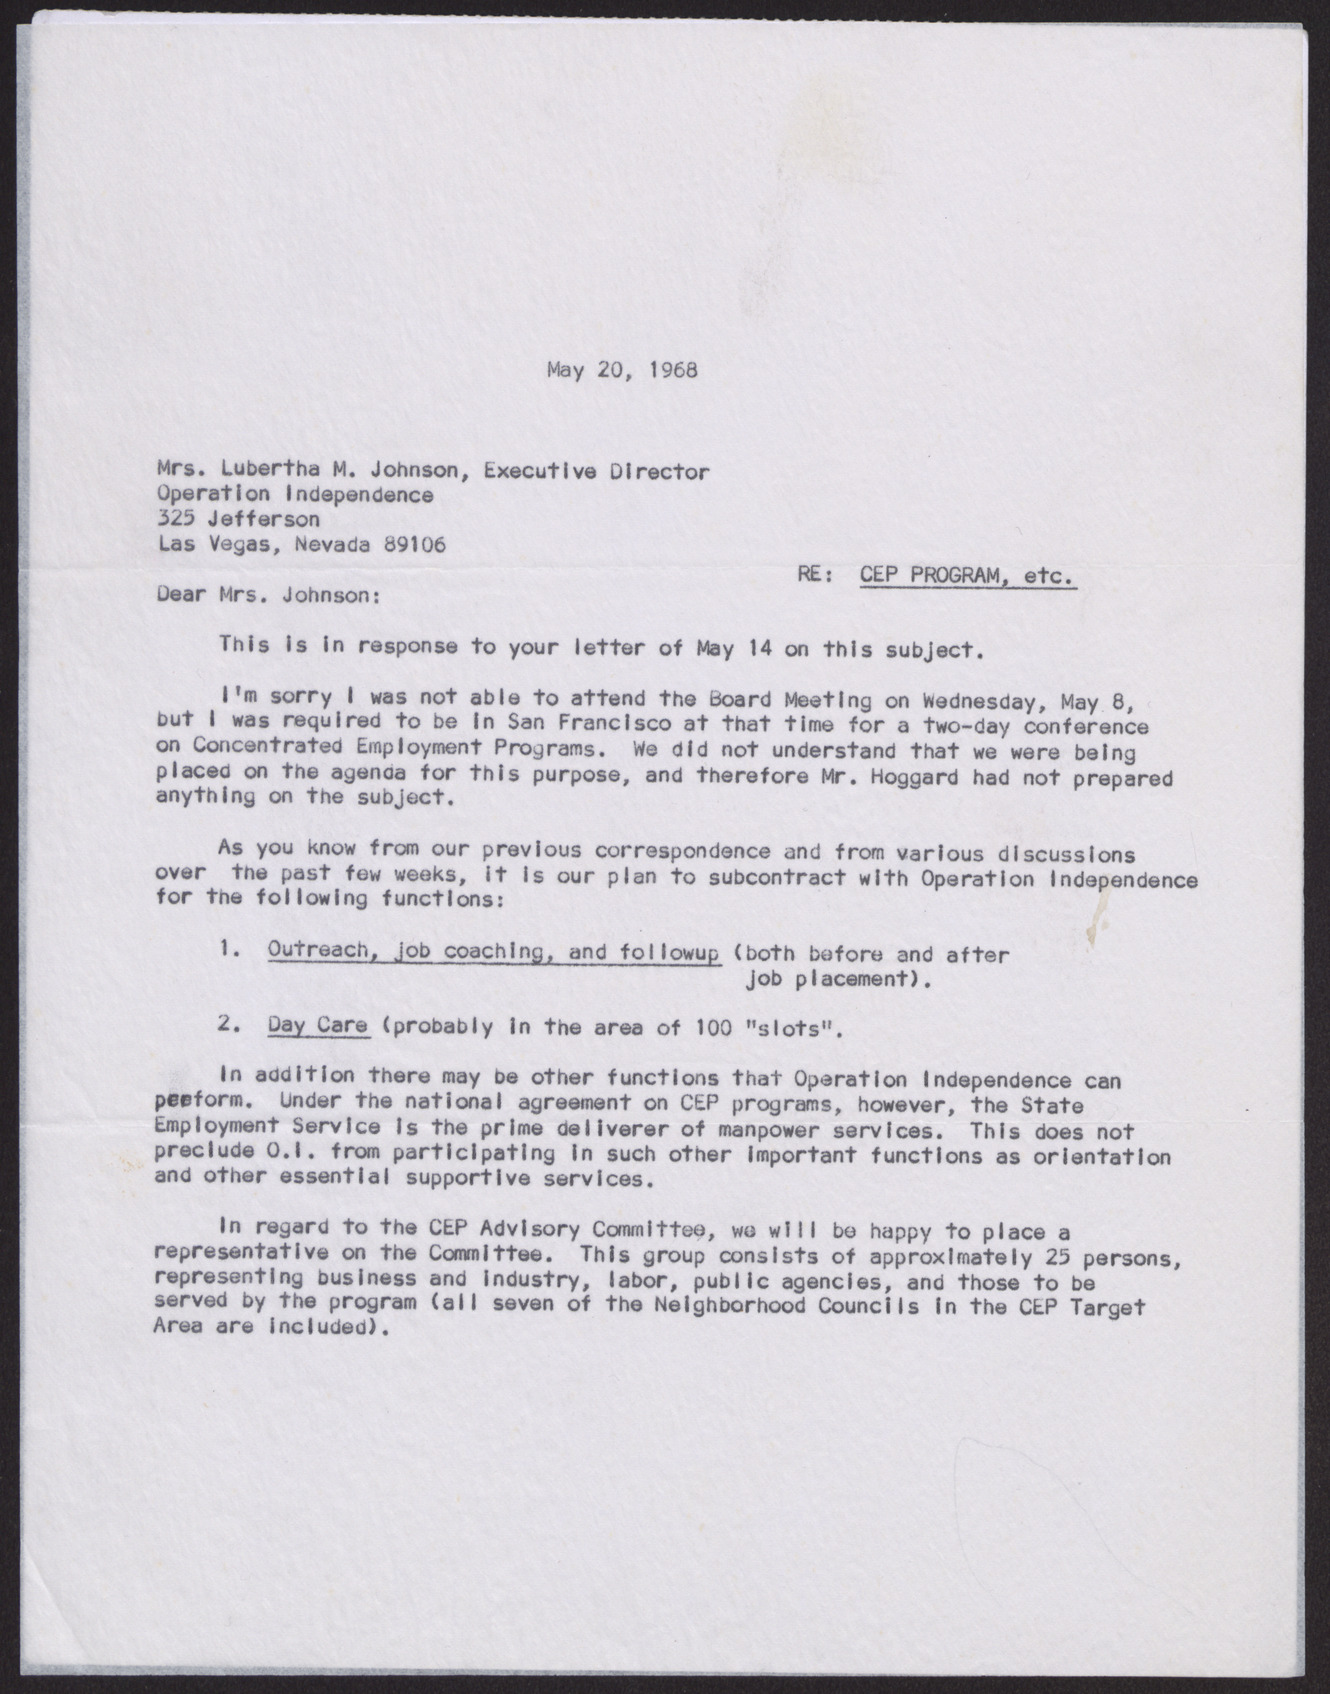 Letter to Mrs. Lubertha Johnson from W. F. Cottrell (2 pages), May 20, 1968